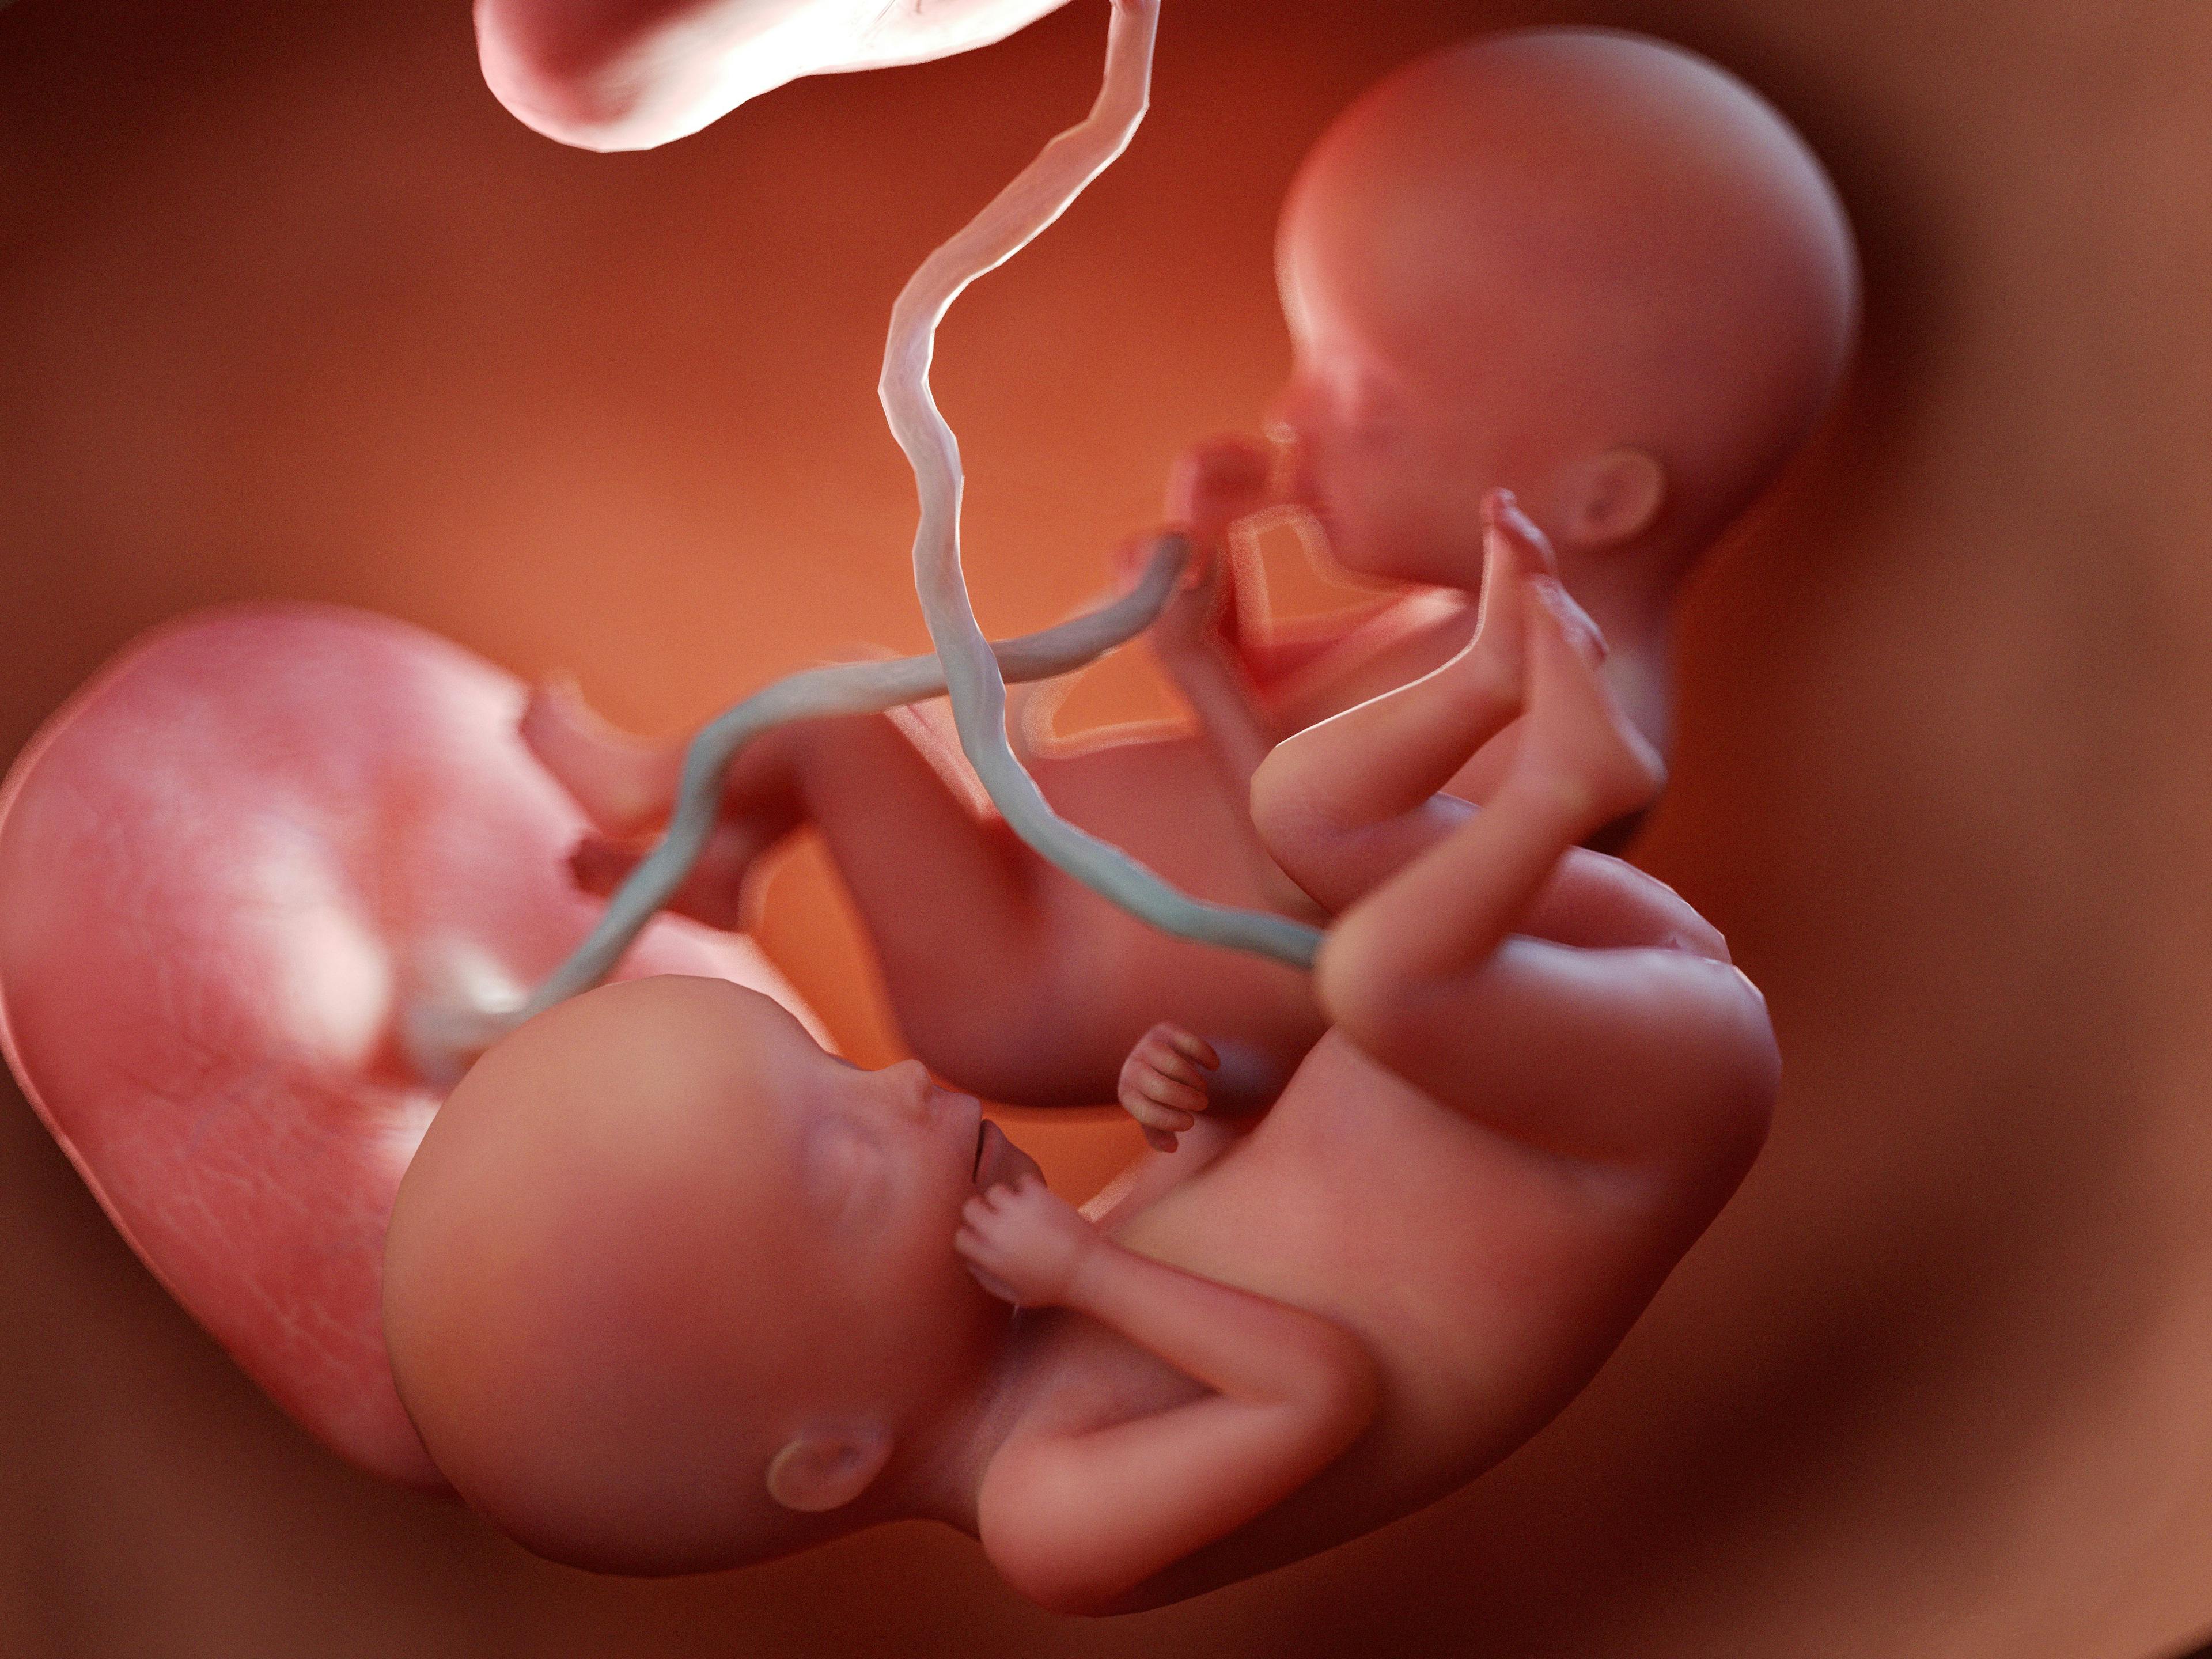 Developmental abnormalities due to fetus and placenta, study finds